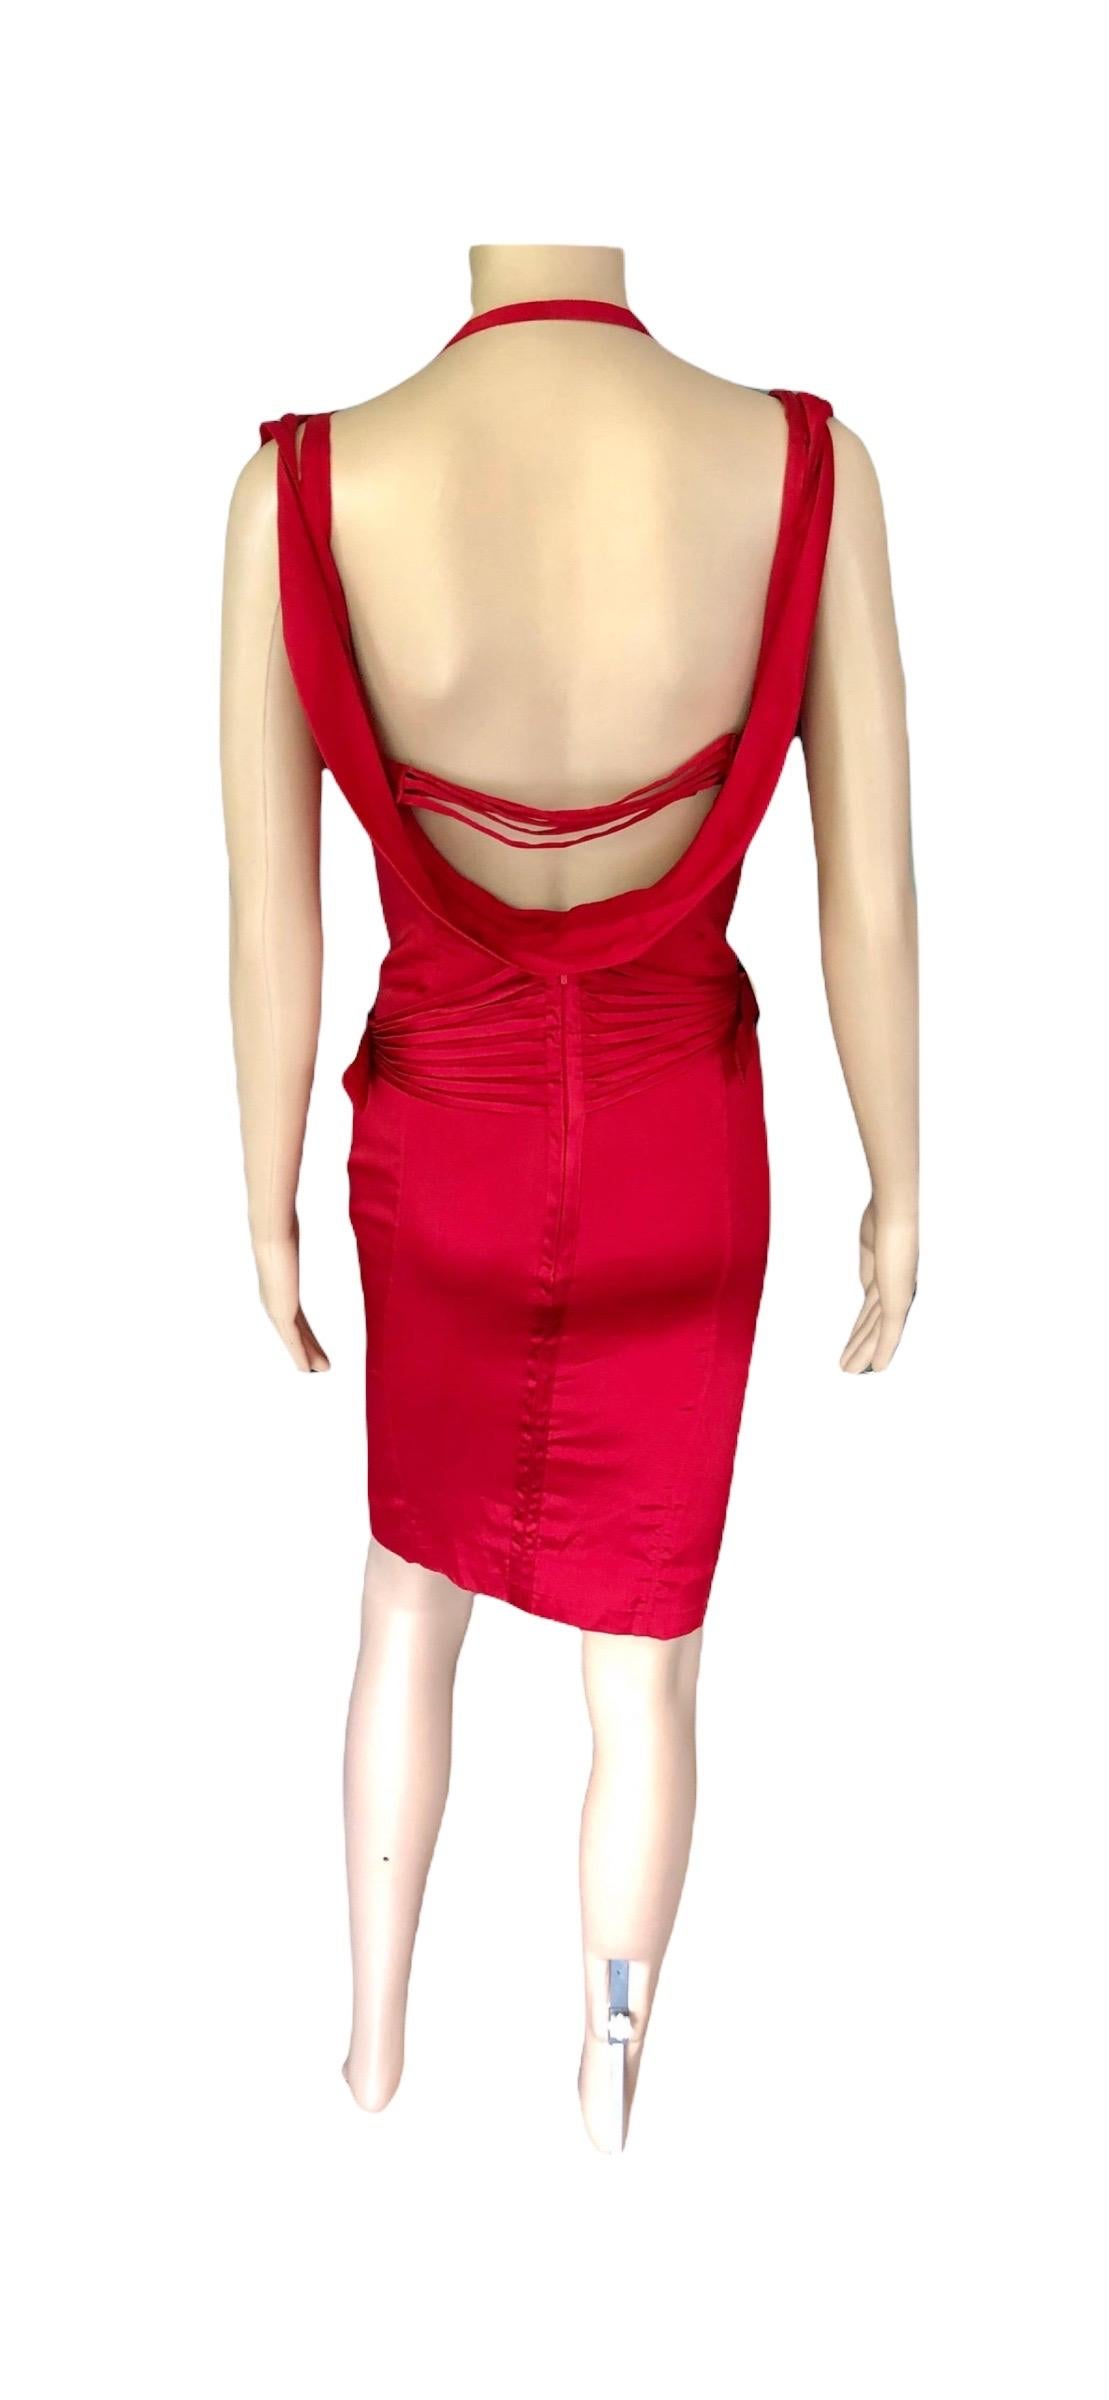 Tom Ford for Gucci F/W 2003 Runway Bustier Corset Silk Red Dress 10